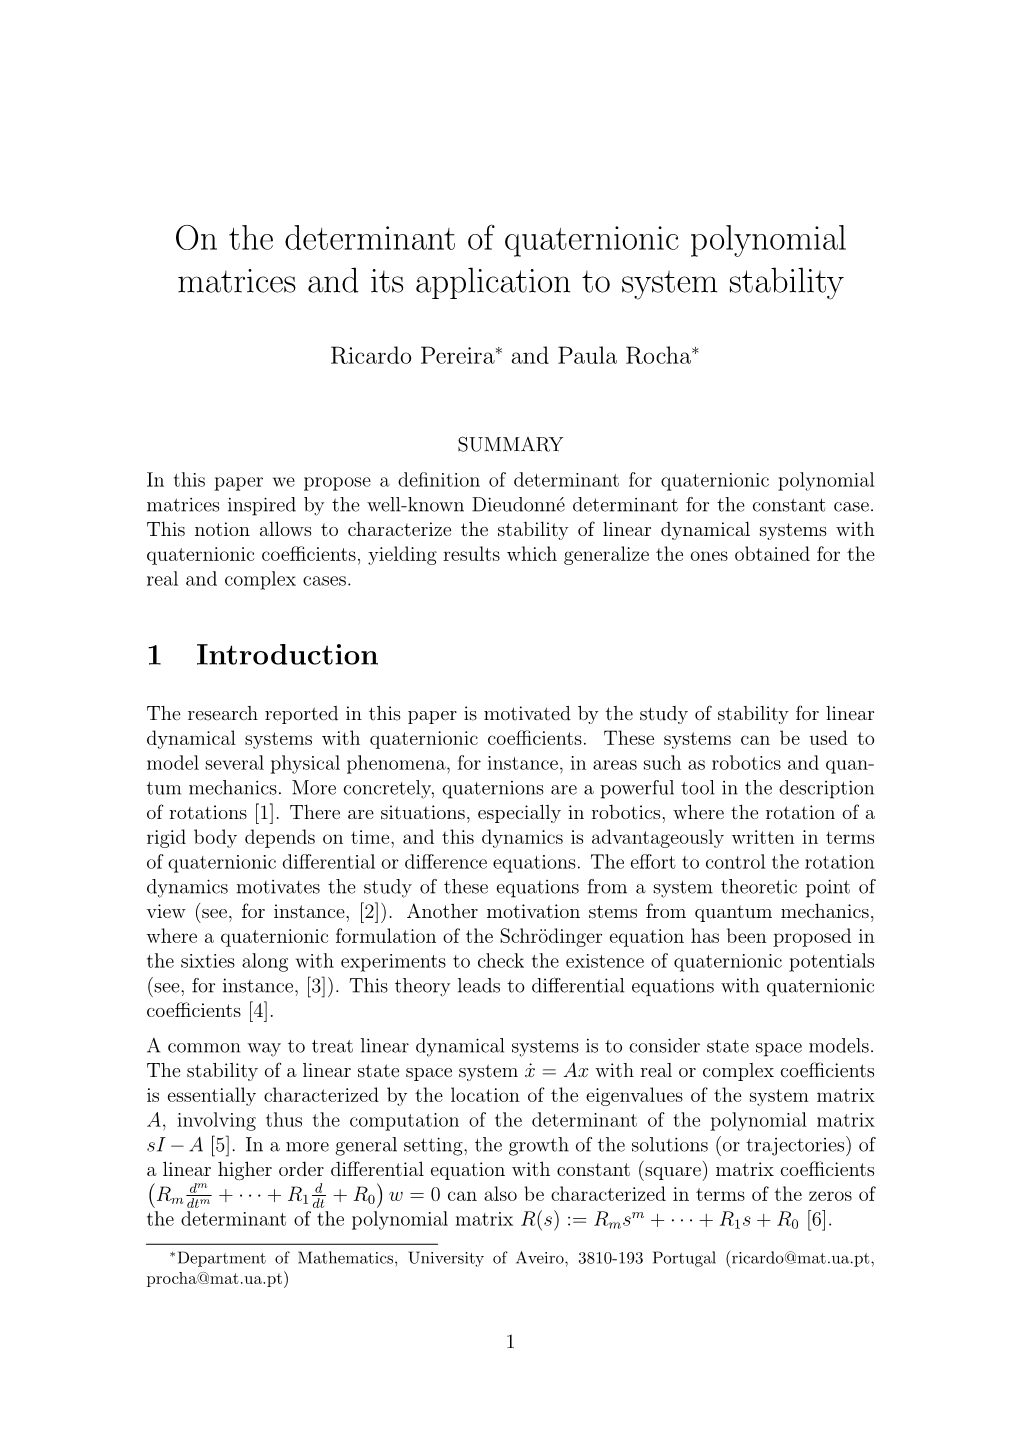 On the Determinant of Quaternionic Polynomial Matrices and Its Application to System Stability